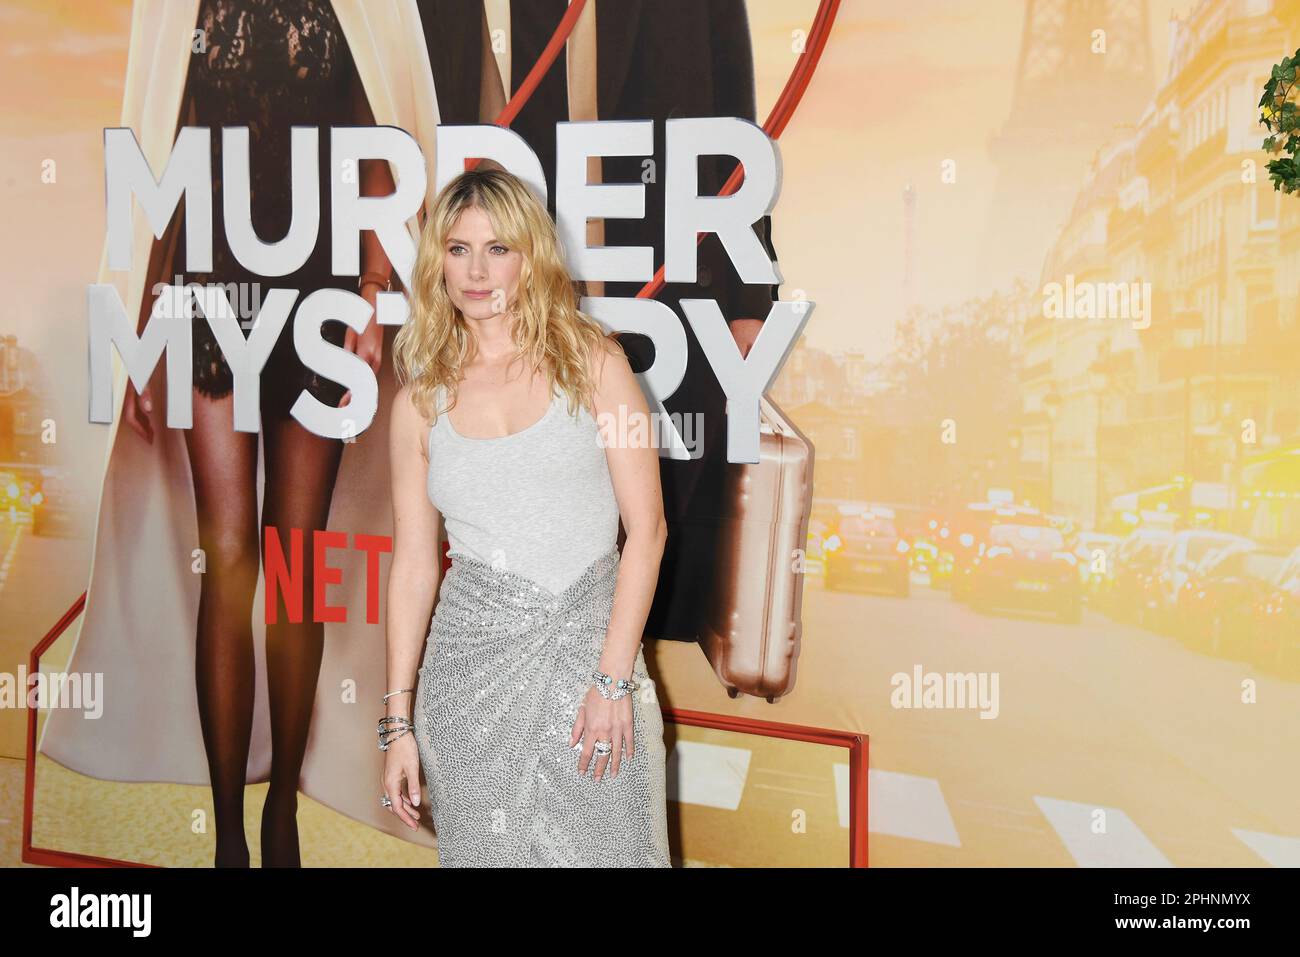 LOS ANGELES, CALIFORNIA - MARCH 28: Mélanie Laurent attends the Los Angeles Premiere of Netflix's 'Murder Mystery 2' at Regency Village Theatre on Mar Stock Photo